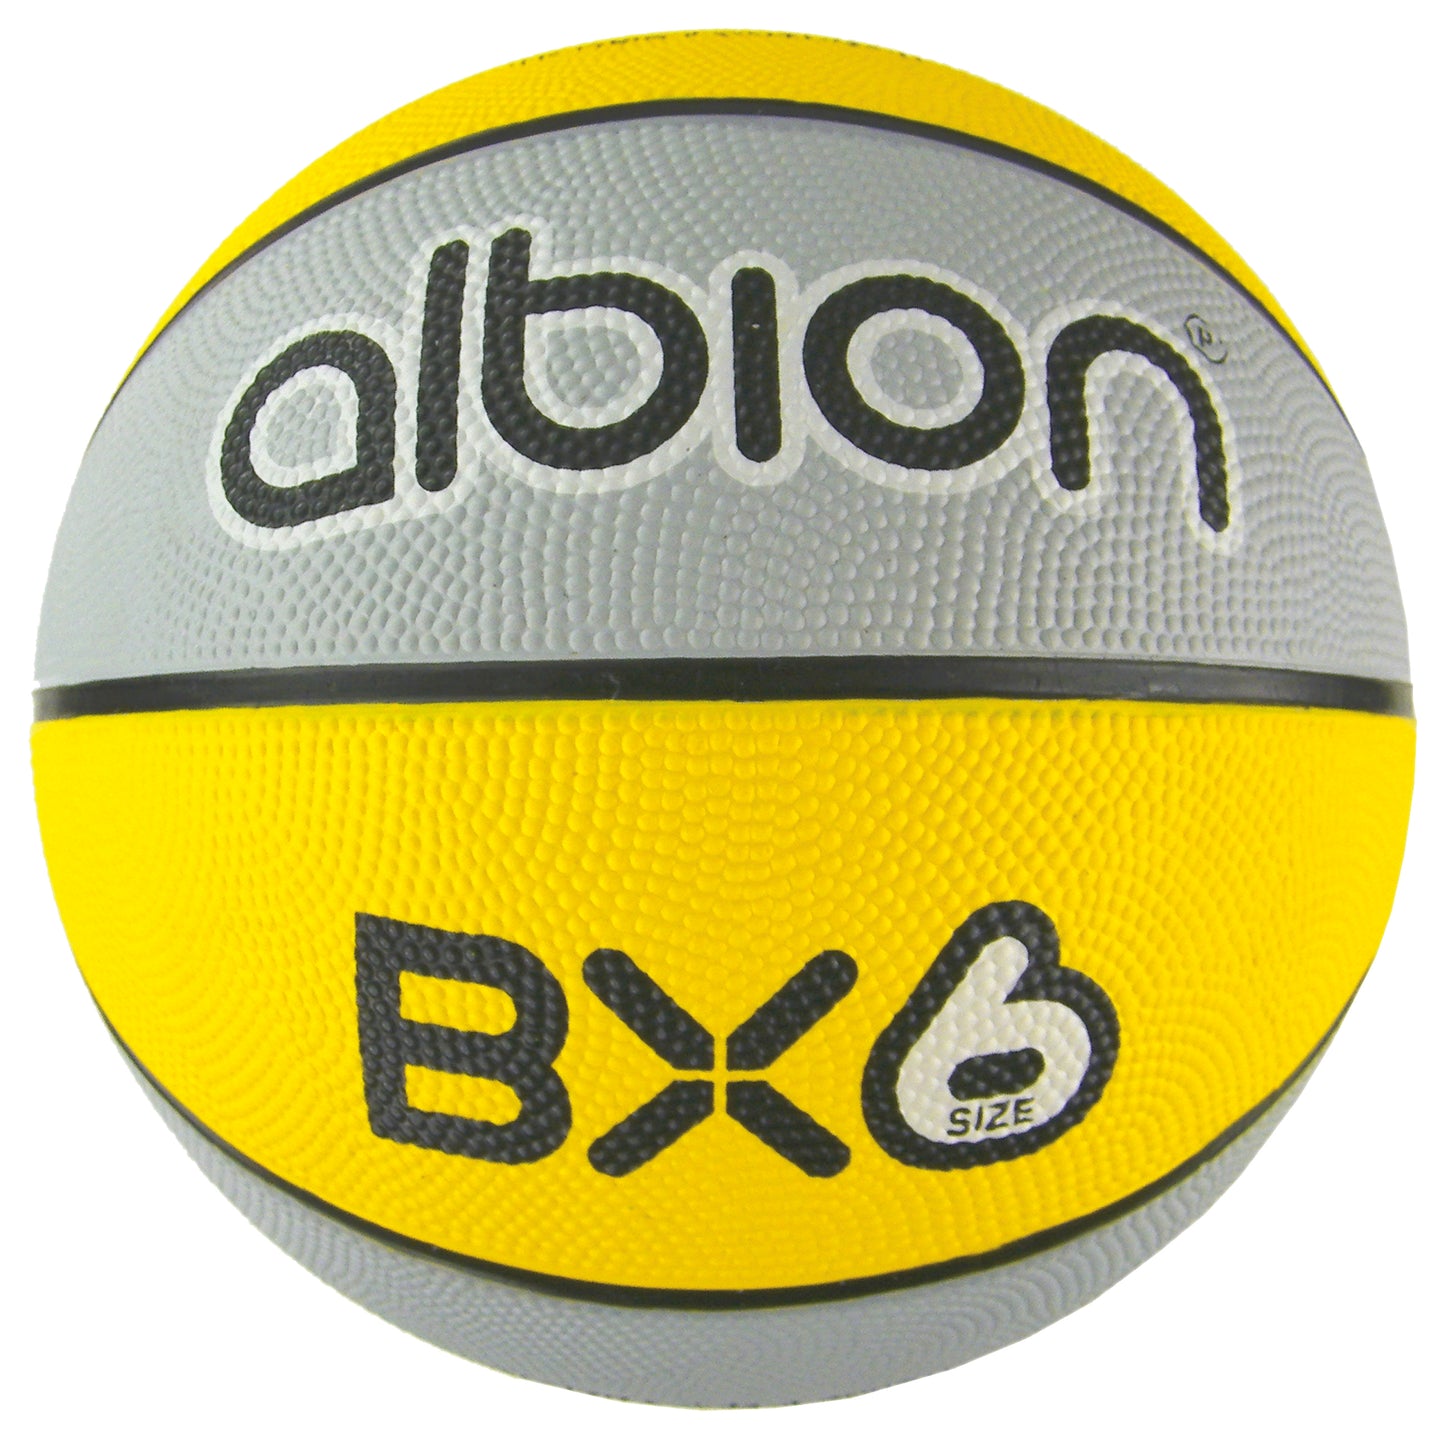 Albion Basketball Size 6